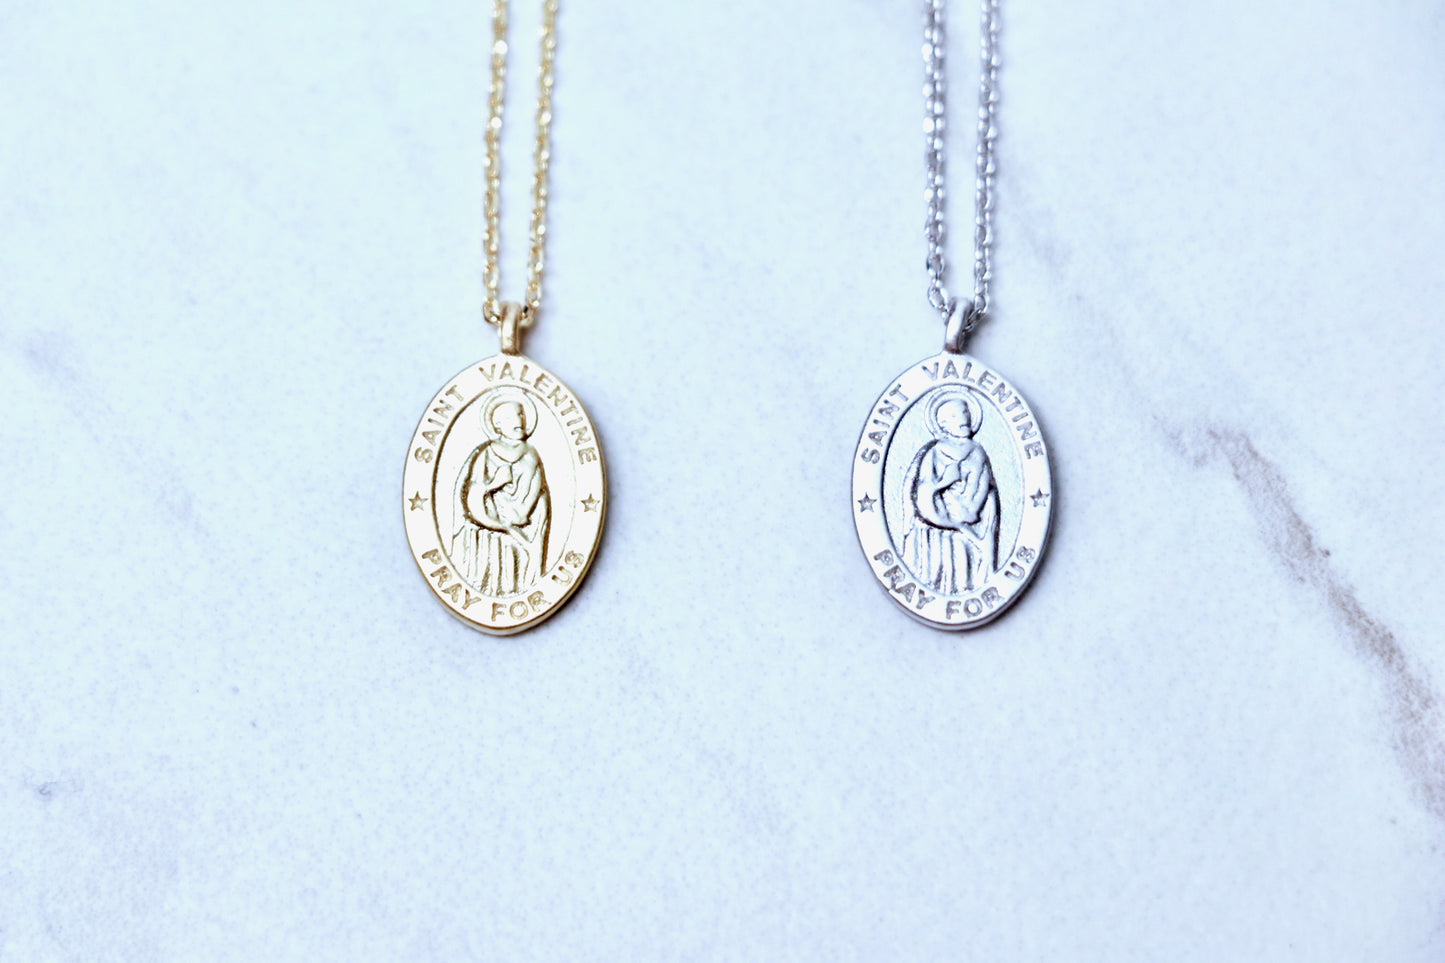 Saint Valentine Pendant Necklace, Wife Gift, Birthday Gift, Sister Gift, Bridesmaid Gift, Best Friend Gift, Religious Gift, Confirmation Gift, Communion Gift